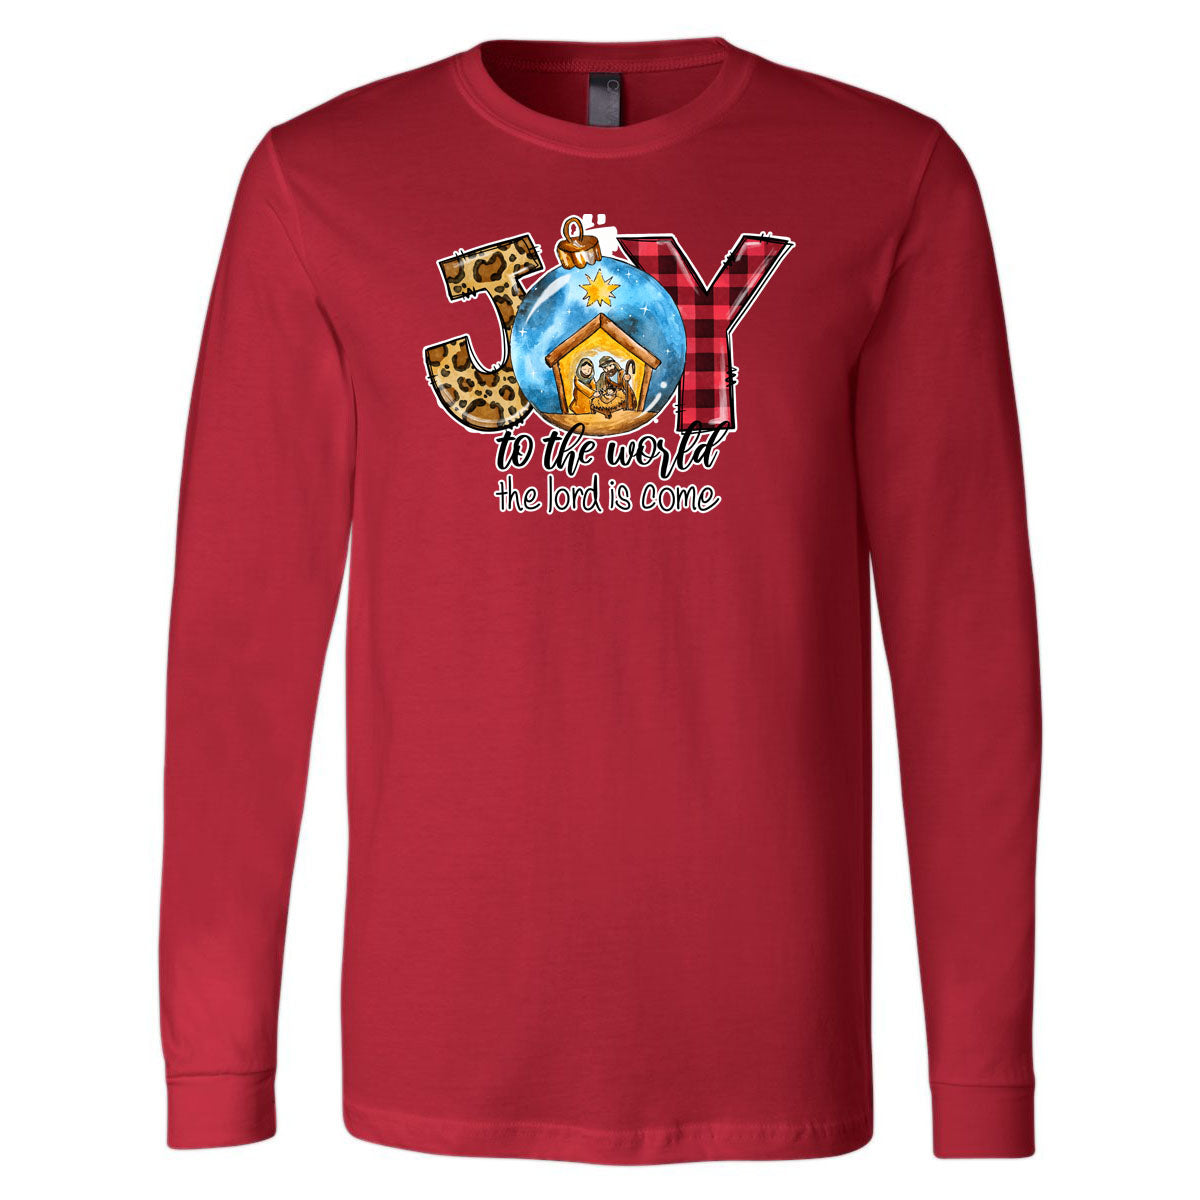 Joy To The World The Lord Is Come - Red Longsleeve Tee - Southern Grace Creations